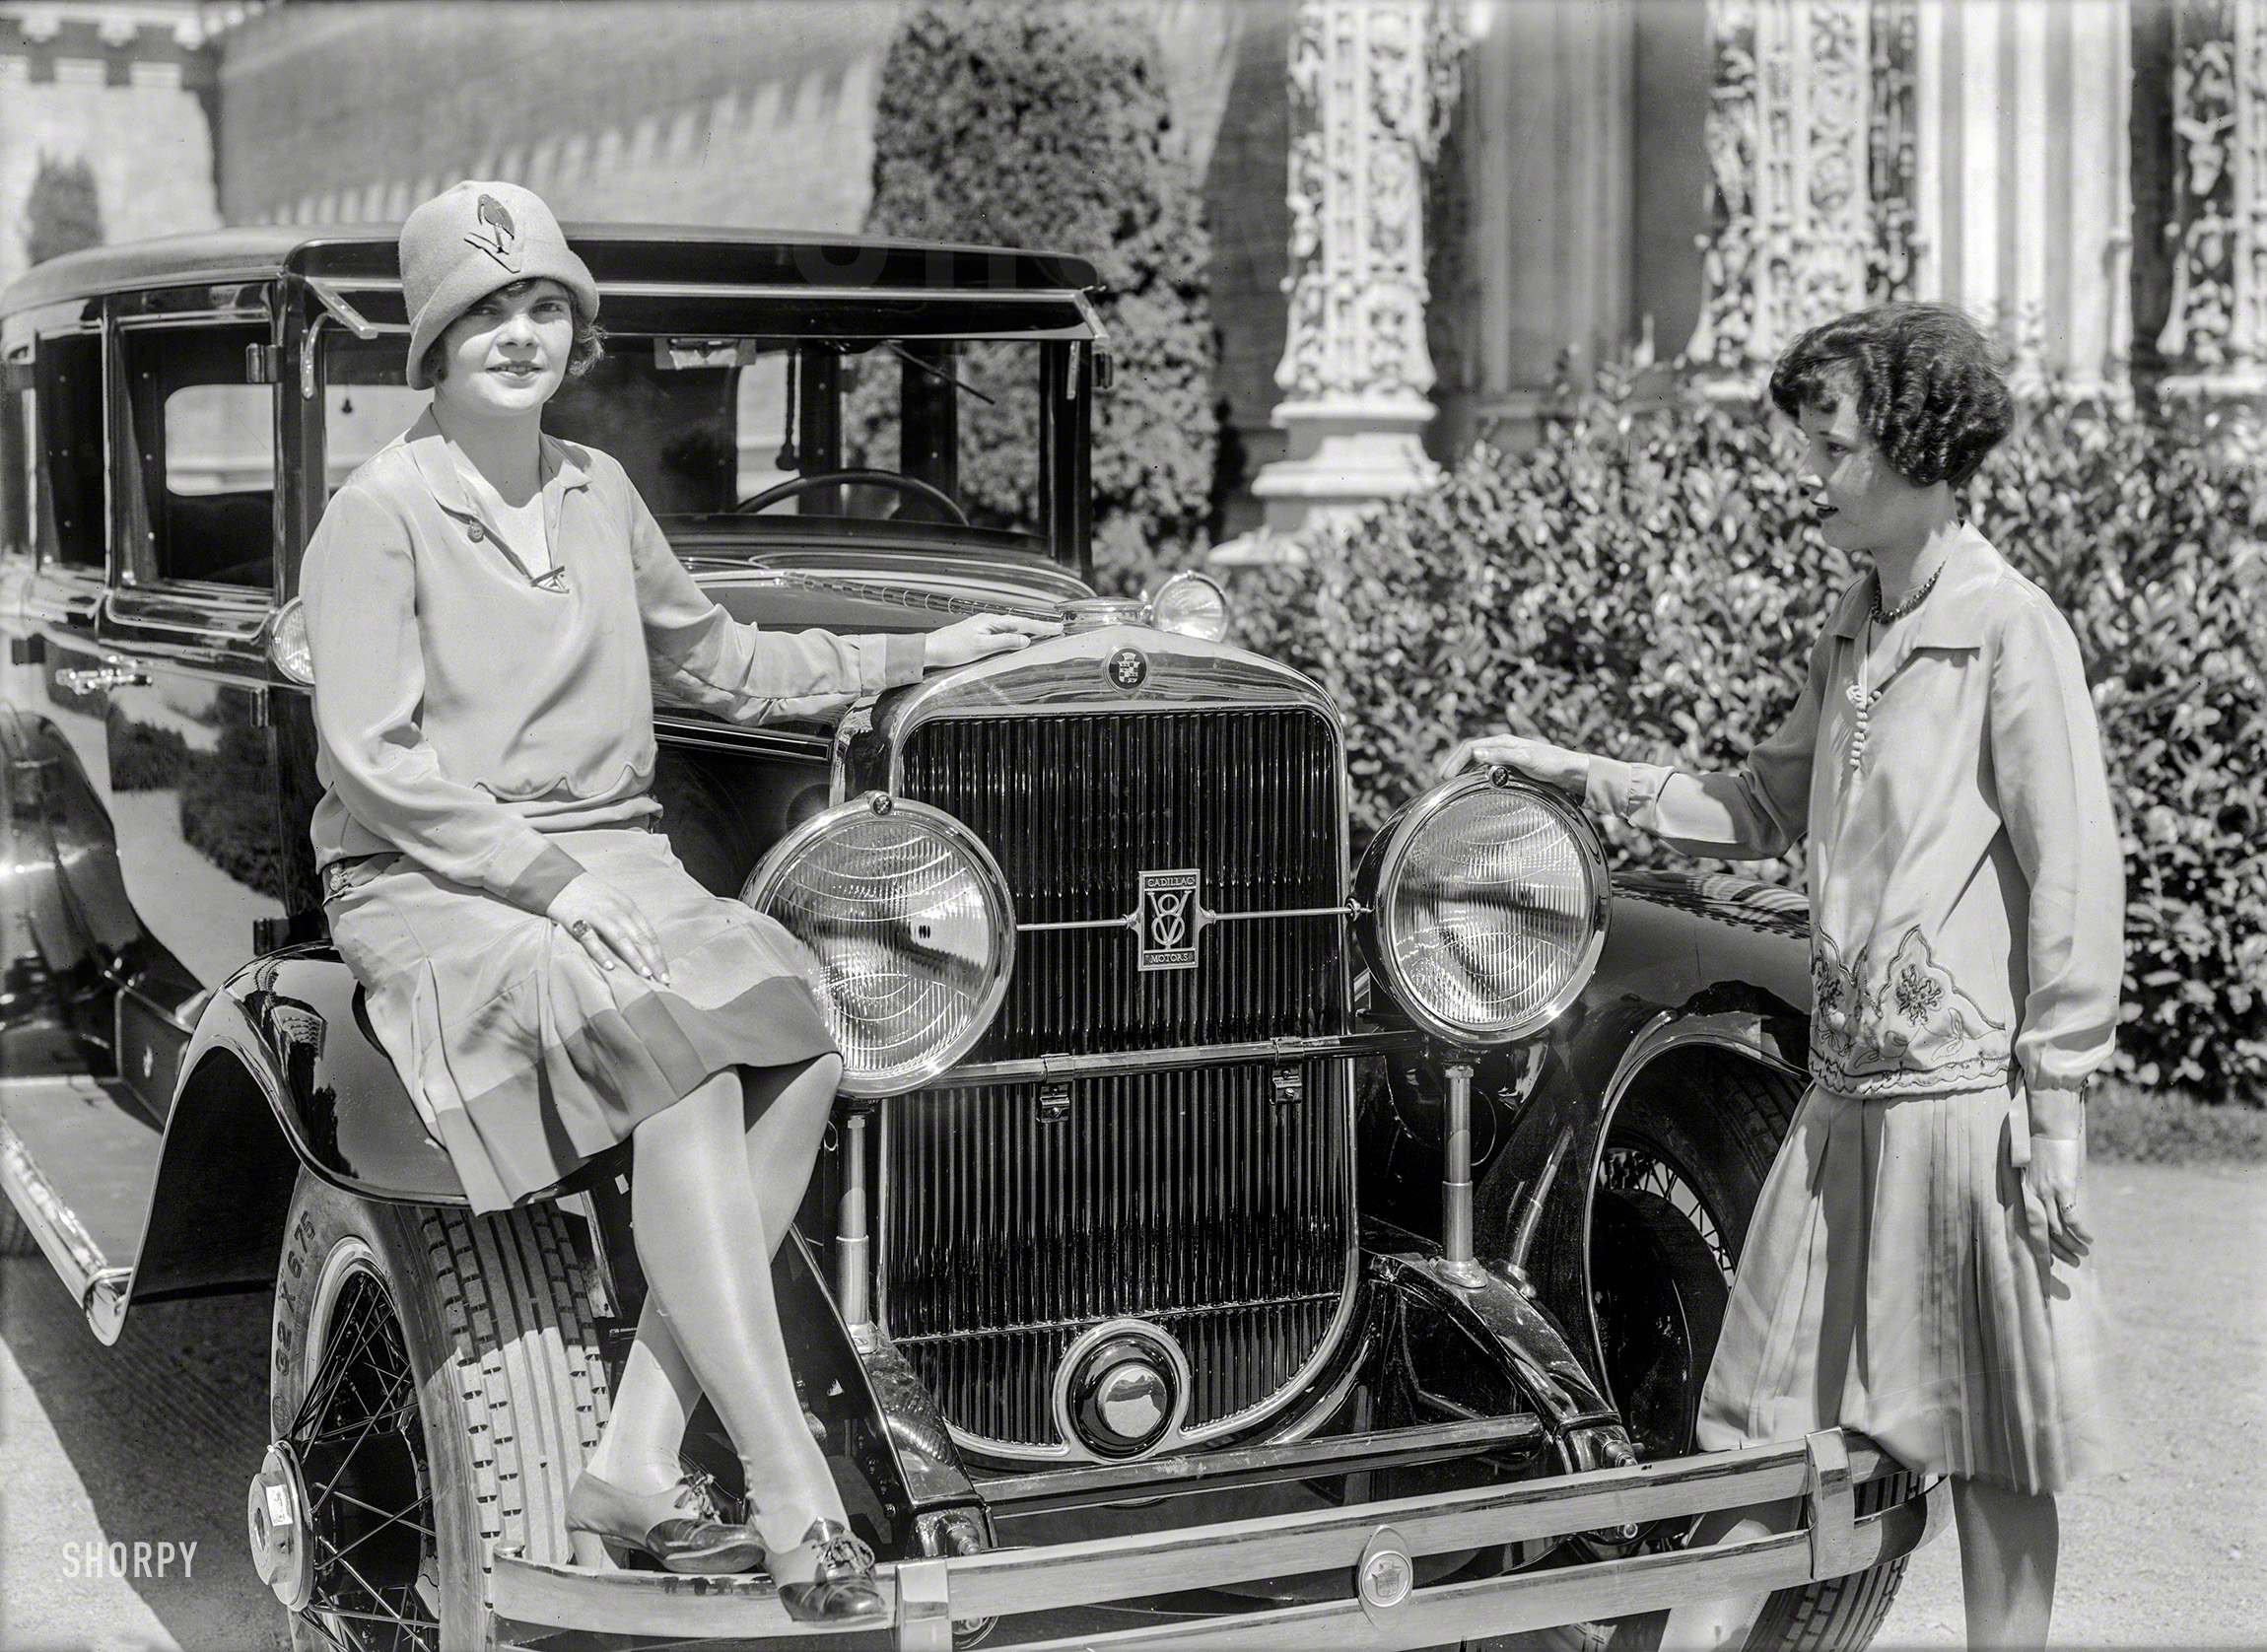 "Cadillac (Flappers, 1927) at de Young Museum, Golden Gate Park." Check out those headlights! 5x7 glass negative by Christopher Helin. View full size.